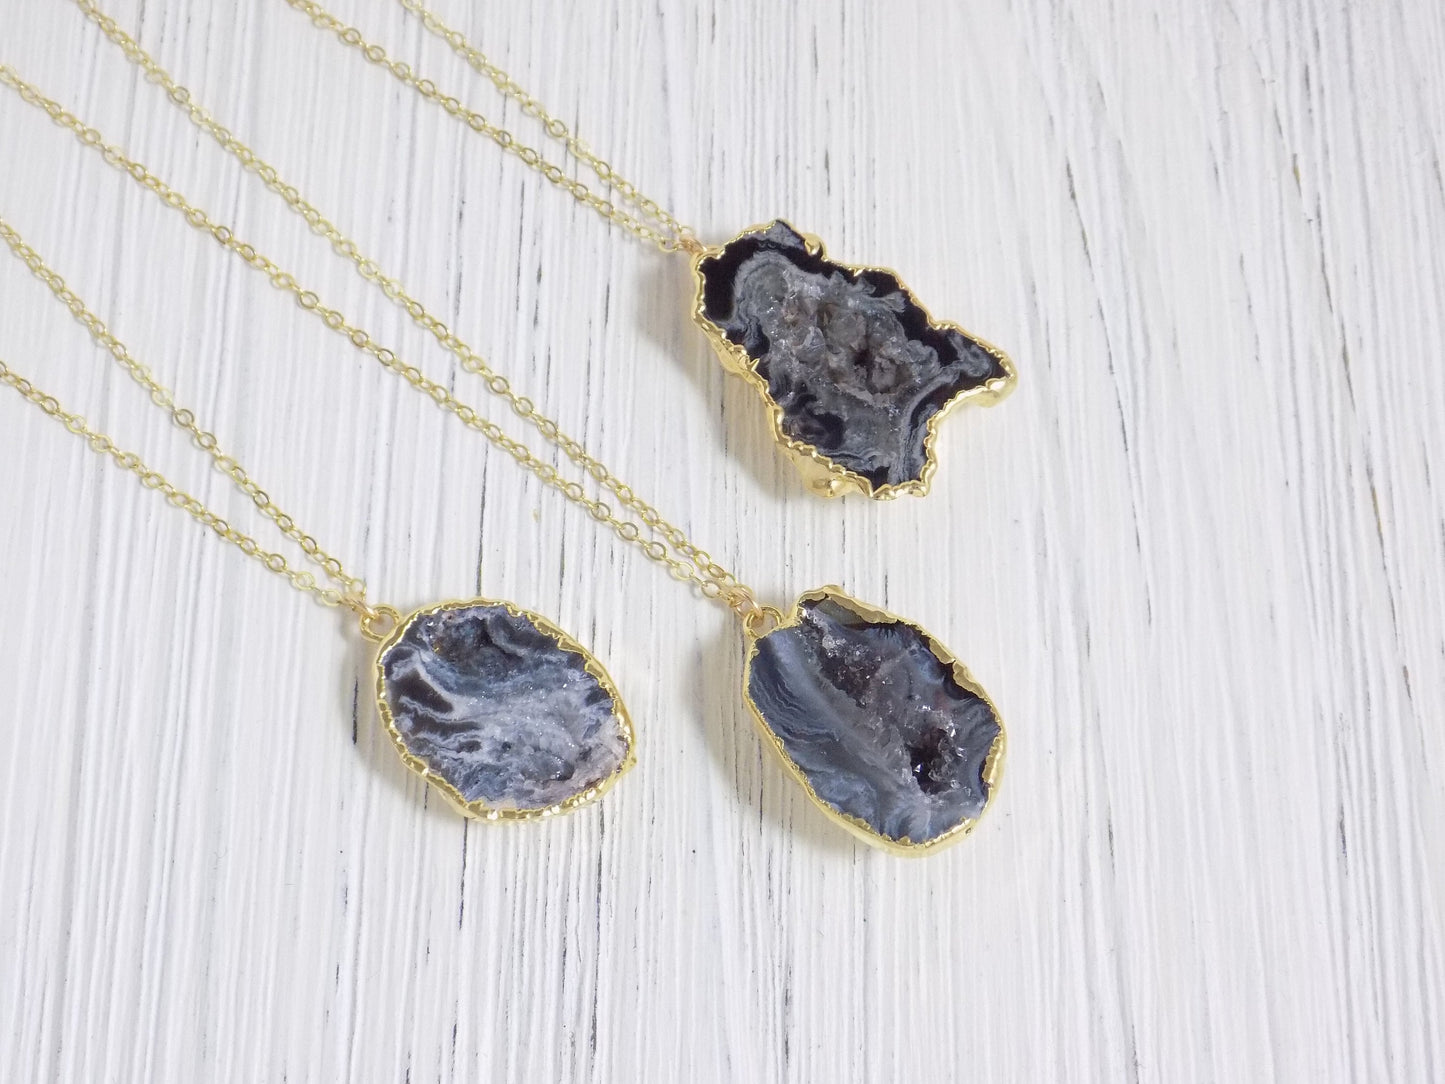 Black Geode Necklace Gold Fill - Small Geode Cave Druzy